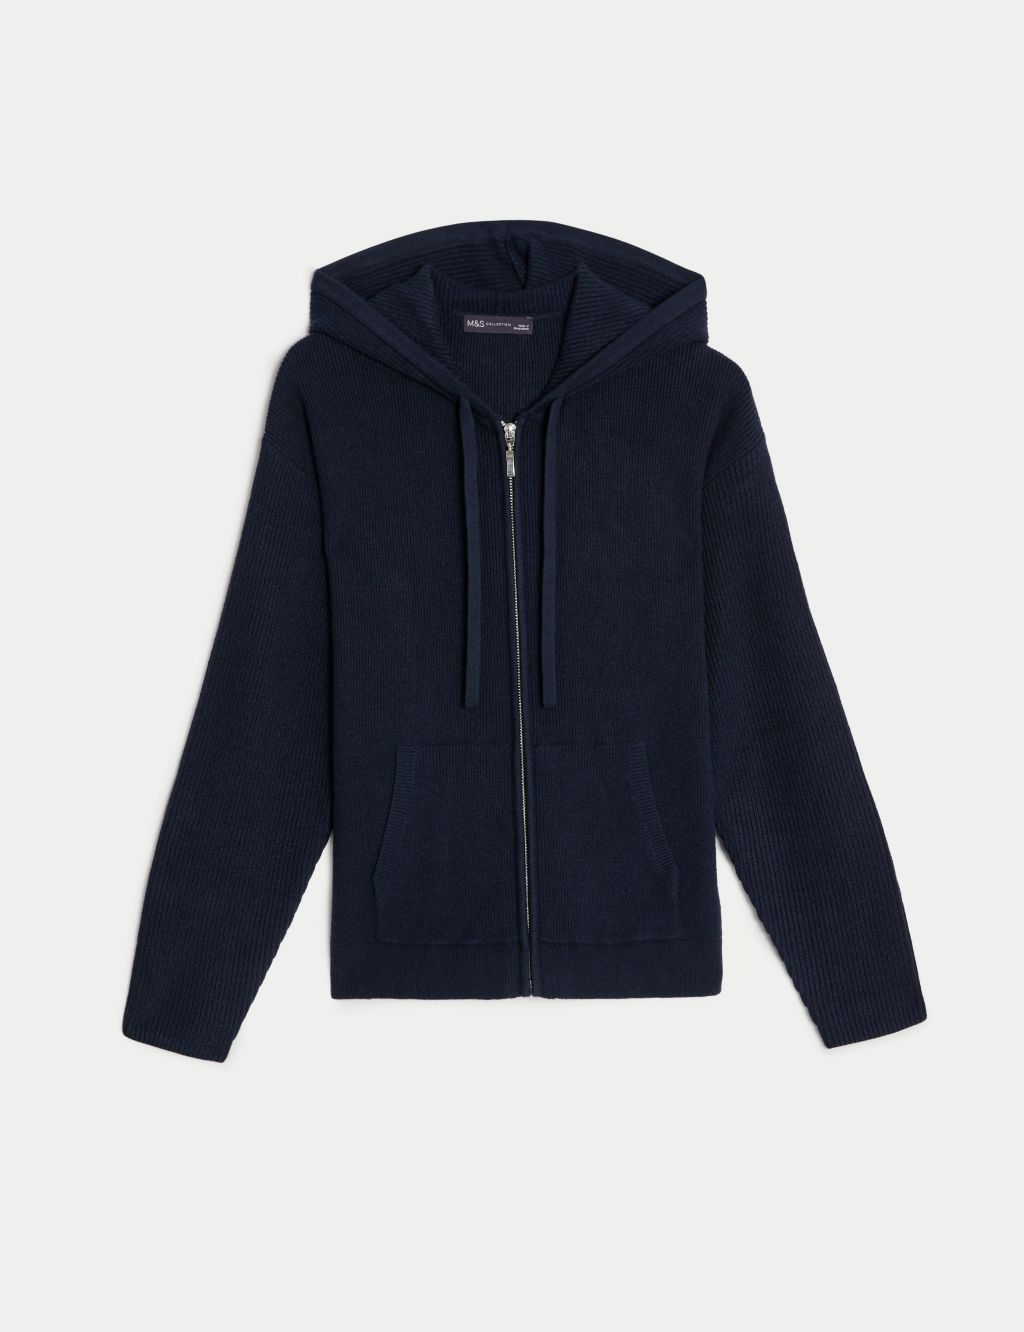 Soft Touch Zip Up Hoodie image 2